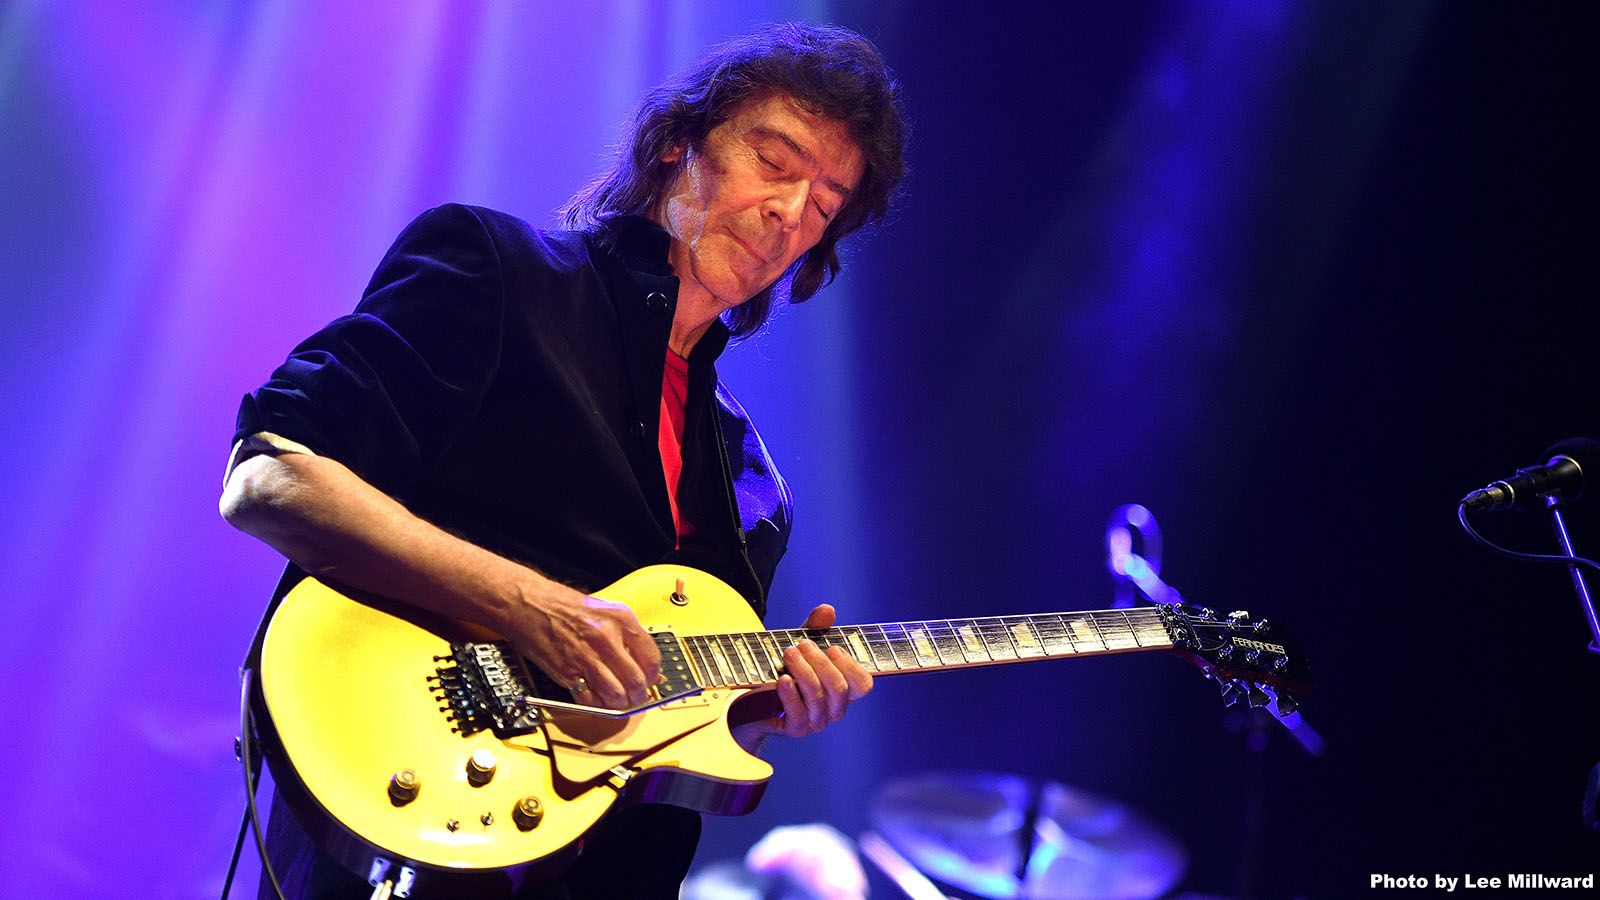 Rock and Roll Hall of Famer Steve Hackett will be at Embassy Theatre on Friday, March 22, to play his solo work and Genesis’ Foxtrot in its entirety.